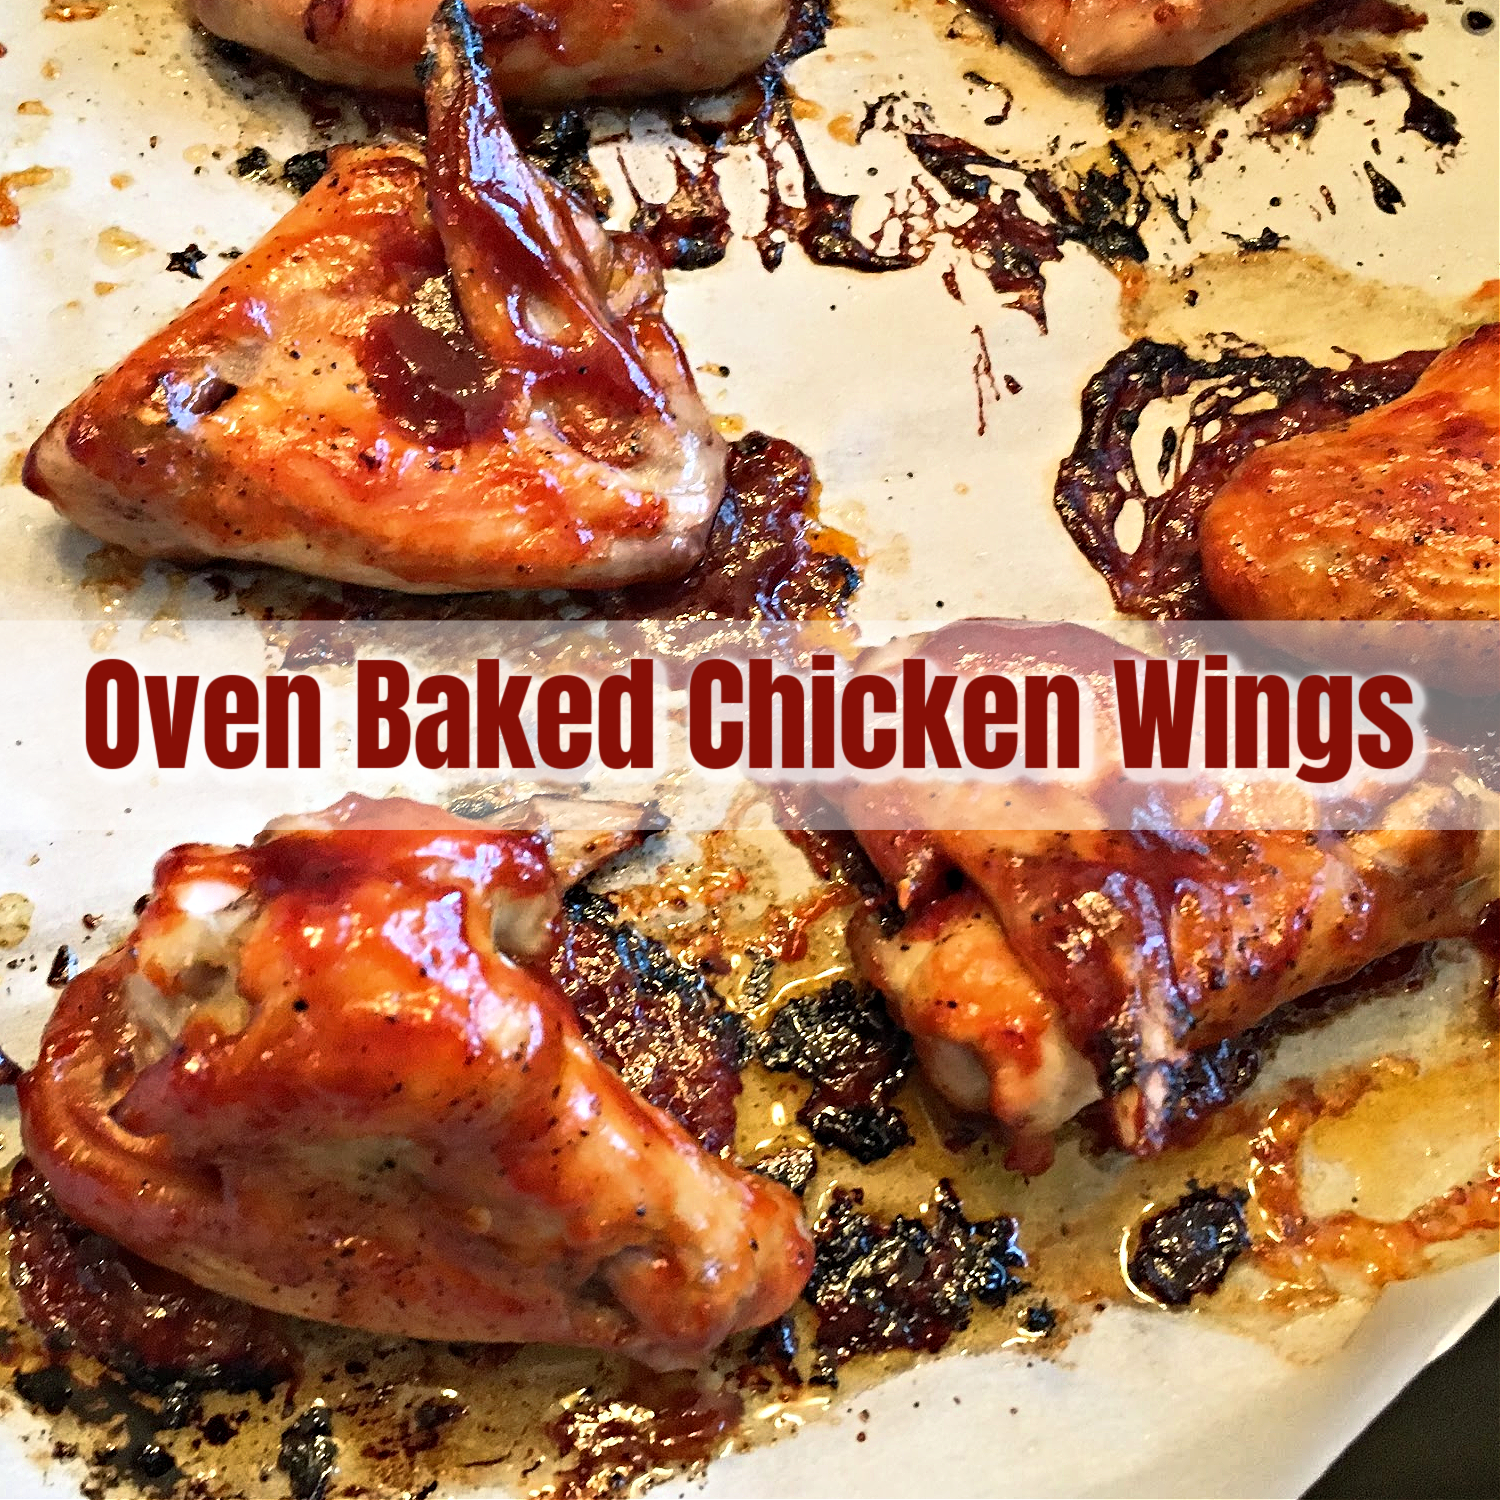 This photo shows oven baked chicken wings on a baking sheet. 